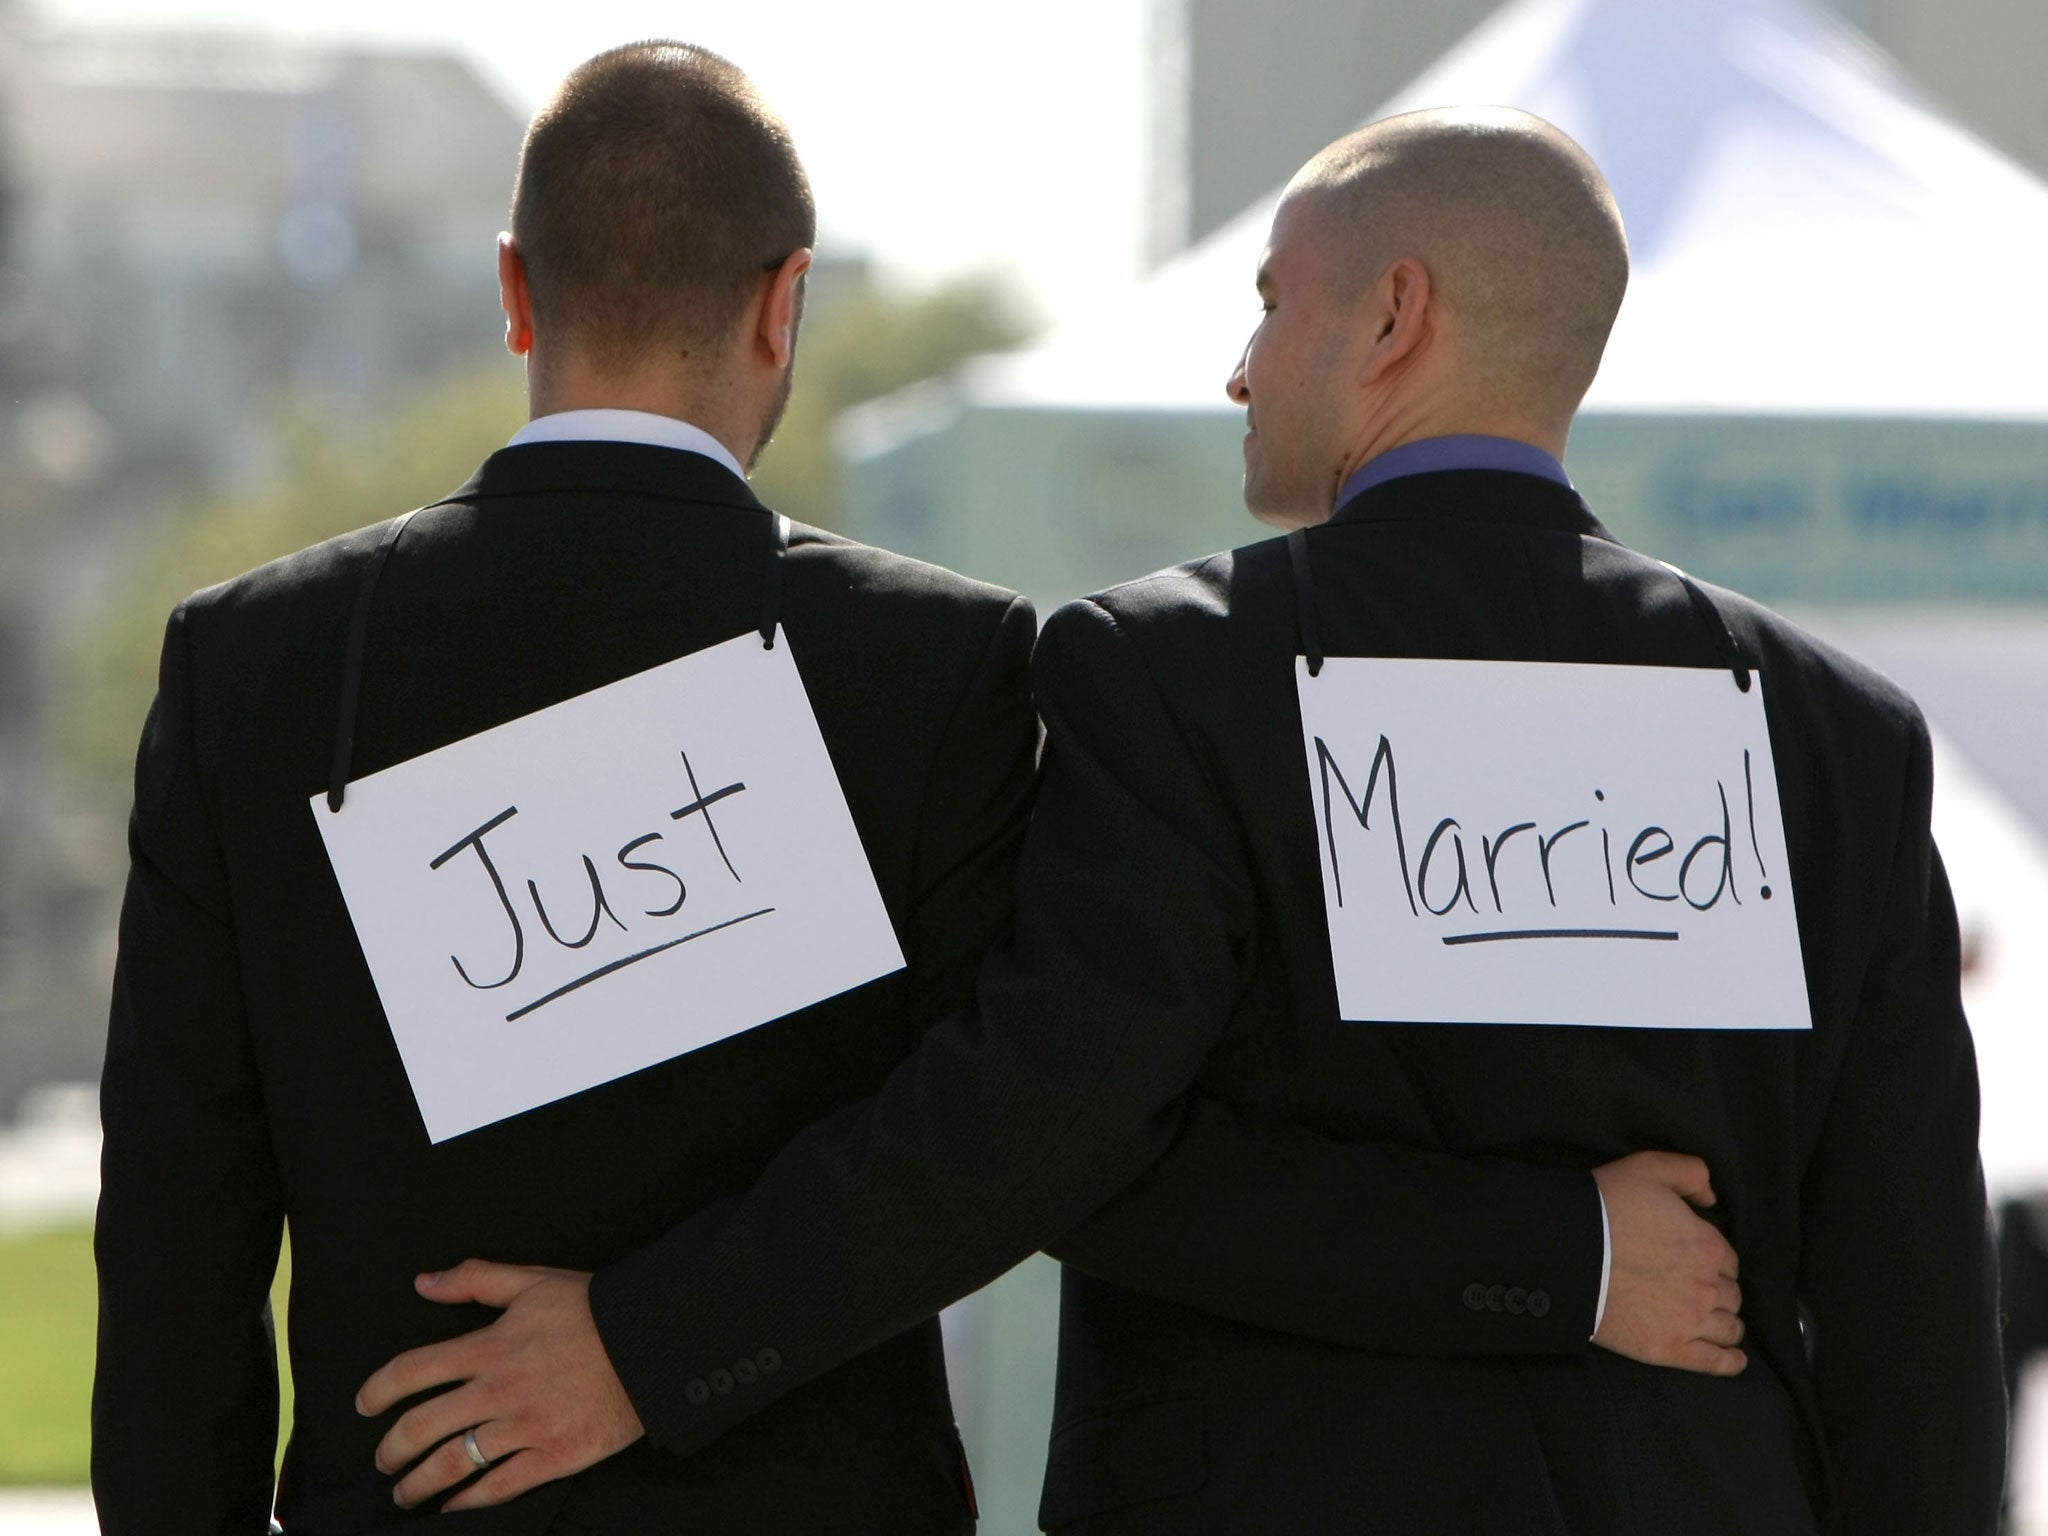 Same-sex couple Ariel Owens (R) and his spouse Joseph Barham walk arm in arm after they were married at San Francisco City Hall June 17, 2008 in San Francisco, California.